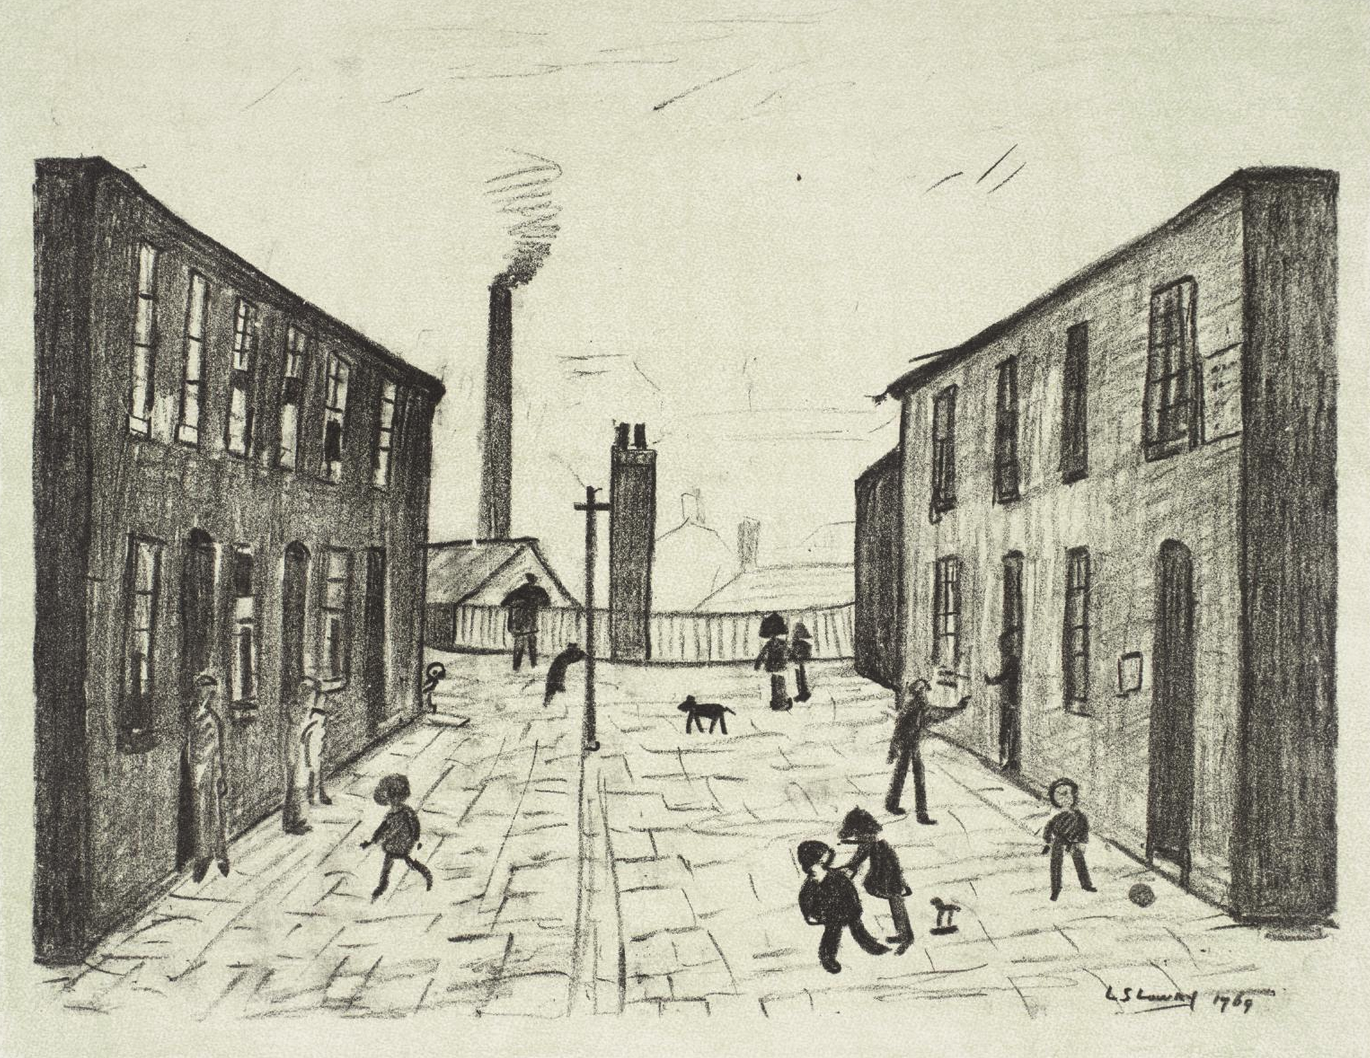 Francis Terrace, Salford (1969 - 1972) by Laurence Stephen Lowry (1887 - 1976), English artist.